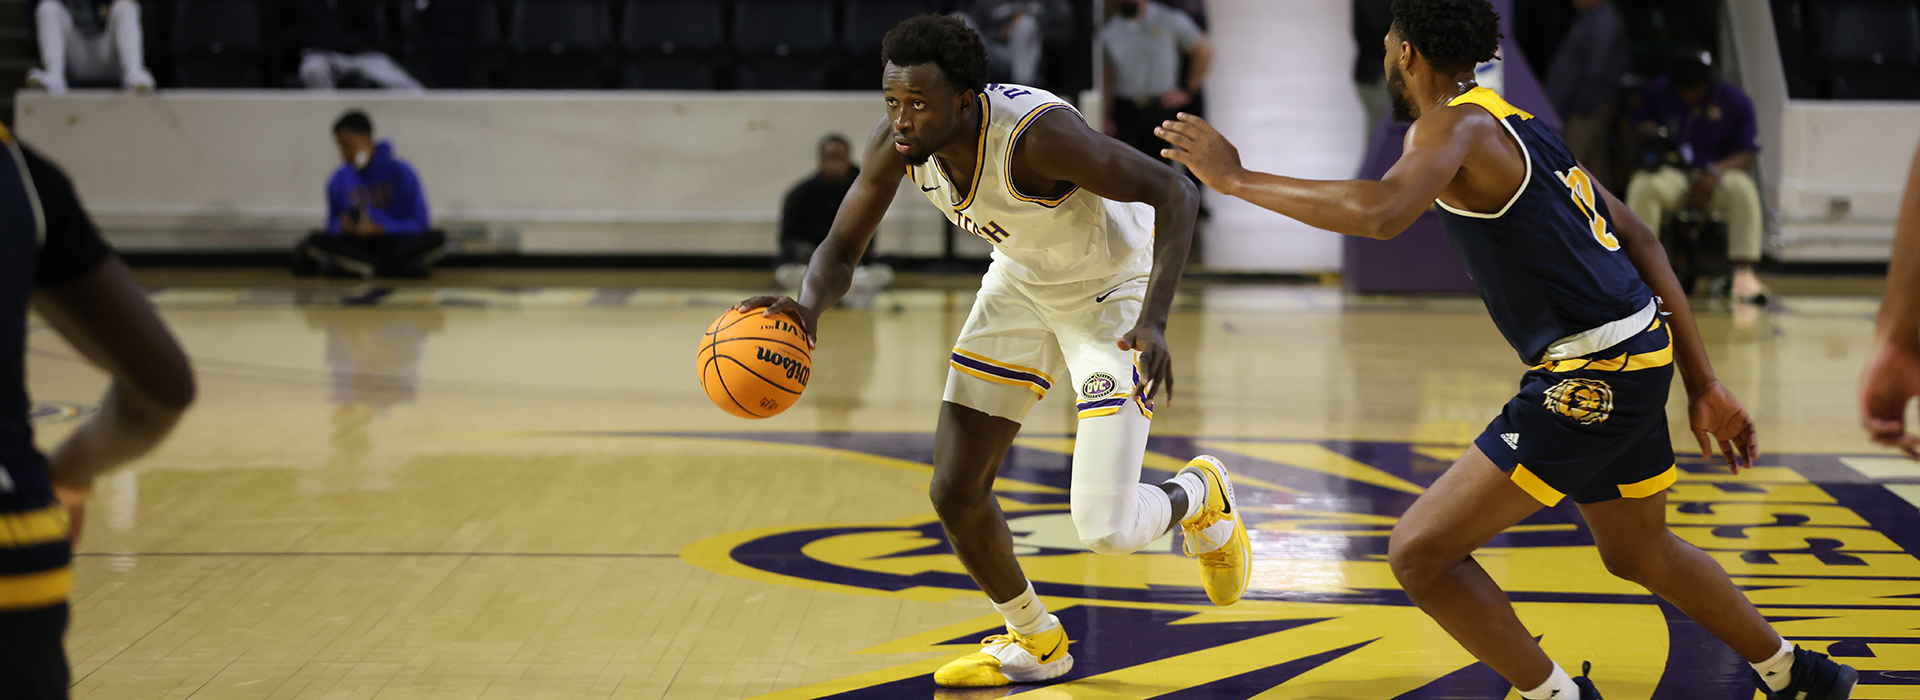 Tech men host in-state rival Lipscomb in Tuesday evening tilt